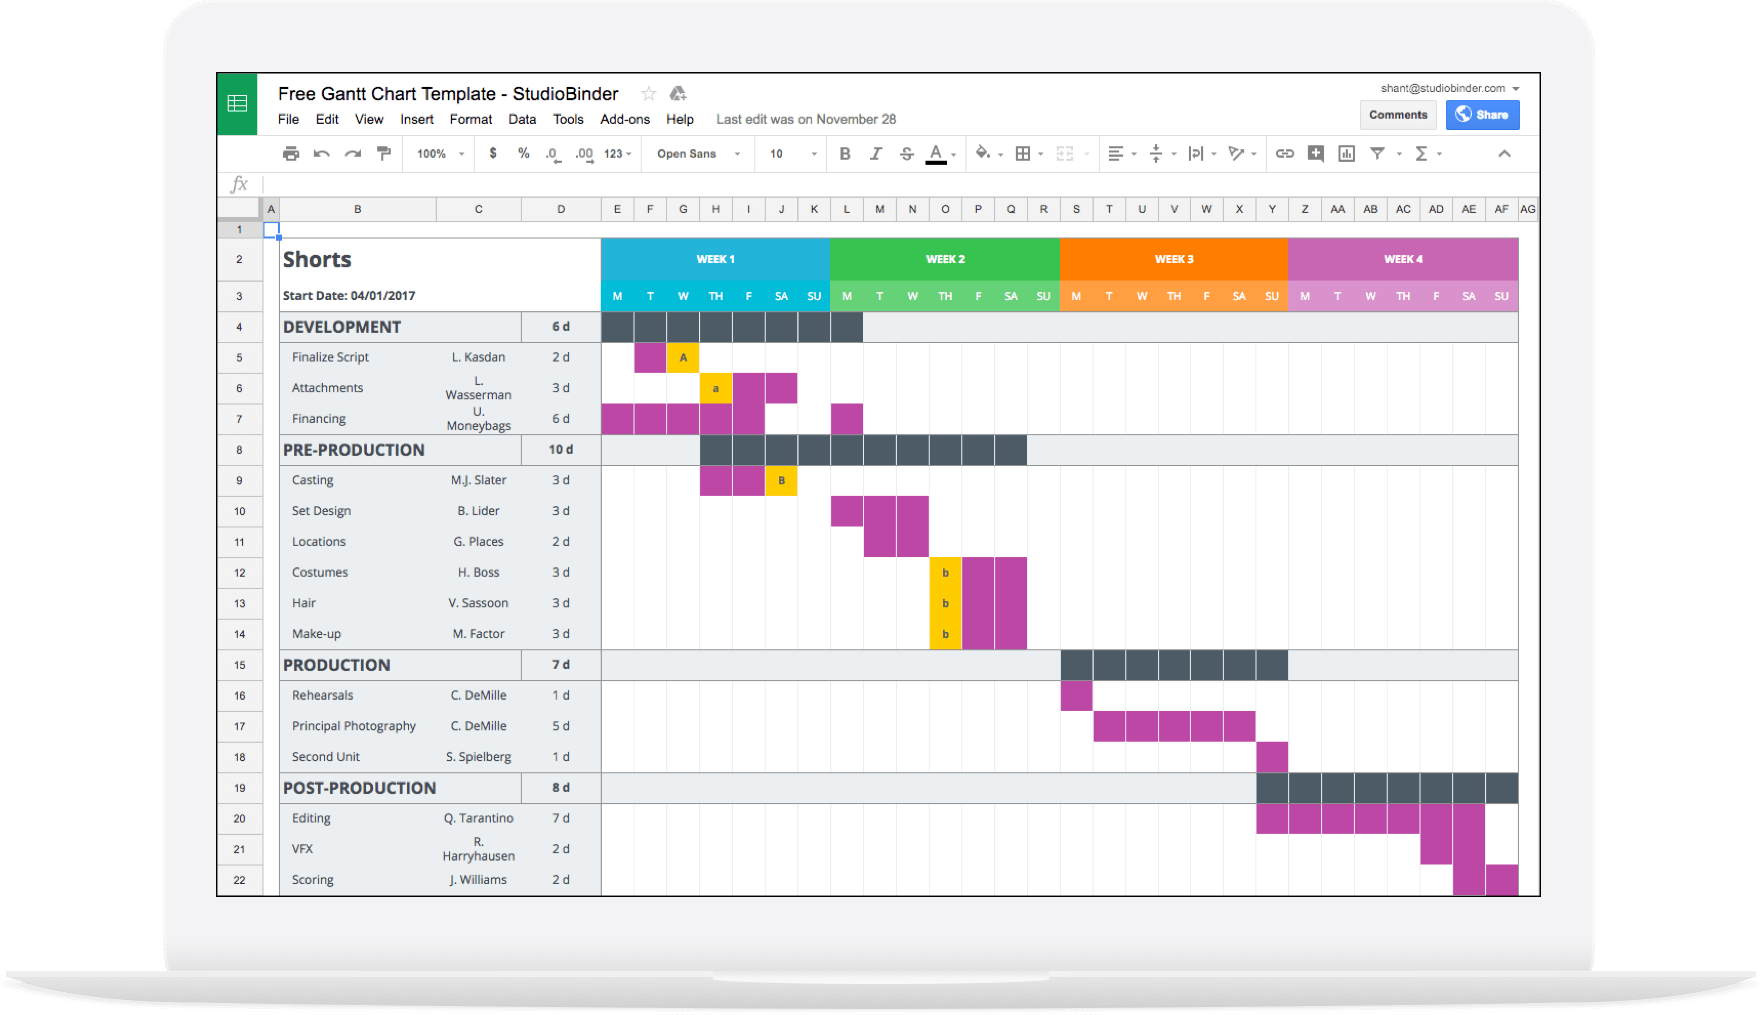 Download A Free Gantt Chart Template For Your Production | Free ...